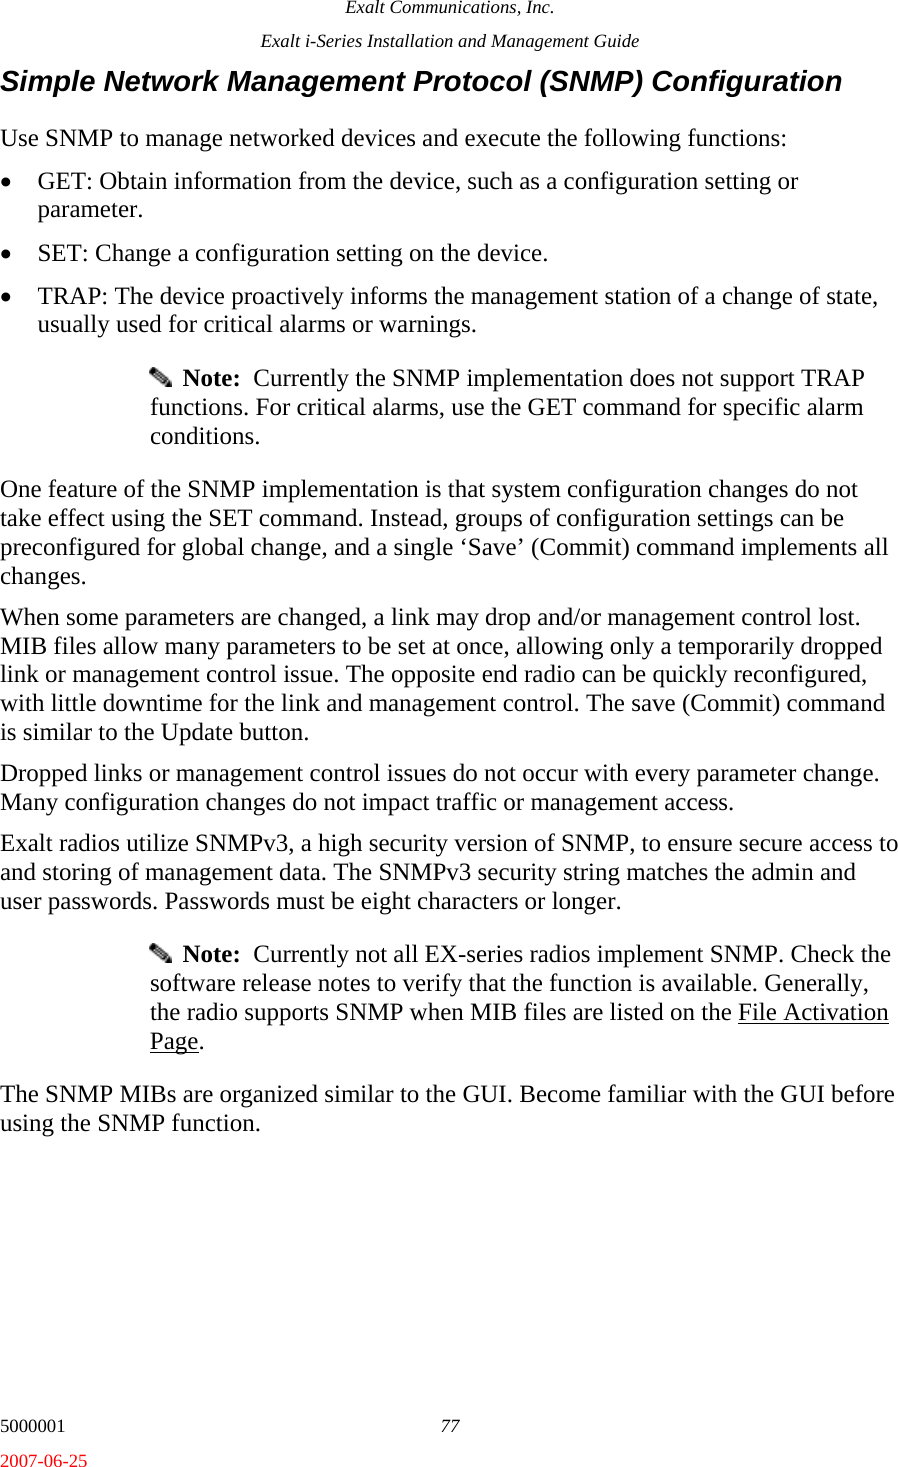 Exalt Communications, Inc. Exalt i-Series Installation and Management Guide 5000001  77 2007-06-25 Simple Network Management Protocol (SNMP) Configuration Use SNMP to manage networked devices and execute the following functions: • GET: Obtain information from the device, such as a configuration setting or parameter. • SET: Change a configuration setting on the device. • TRAP: The device proactively informs the management station of a change of state, usually used for critical alarms or warnings.   Note:  Currently the SNMP implementation does not support TRAP functions. For critical alarms, use the GET command for specific alarm conditions. One feature of the SNMP implementation is that system configuration changes do not take effect using the SET command. Instead, groups of configuration settings can be preconfigured for global change, and a single ‘Save’ (Commit) command implements all changes. When some parameters are changed, a link may drop and/or management control lost. MIB files allow many parameters to be set at once, allowing only a temporarily dropped link or management control issue. The opposite end radio can be quickly reconfigured, with little downtime for the link and management control. The save (Commit) command is similar to the Update button.  Dropped links or management control issues do not occur with every parameter change. Many configuration changes do not impact traffic or management access. Exalt radios utilize SNMPv3, a high security version of SNMP, to ensure secure access to and storing of management data. The SNMPv3 security string matches the admin and user passwords. Passwords must be eight characters or longer.   Note:  Currently not all EX-series radios implement SNMP. Check the software release notes to verify that the function is available. Generally, the radio supports SNMP when MIB files are listed on the File Activation Page. The SNMP MIBs are organized similar to the GUI. Become familiar with the GUI before using the SNMP function. 